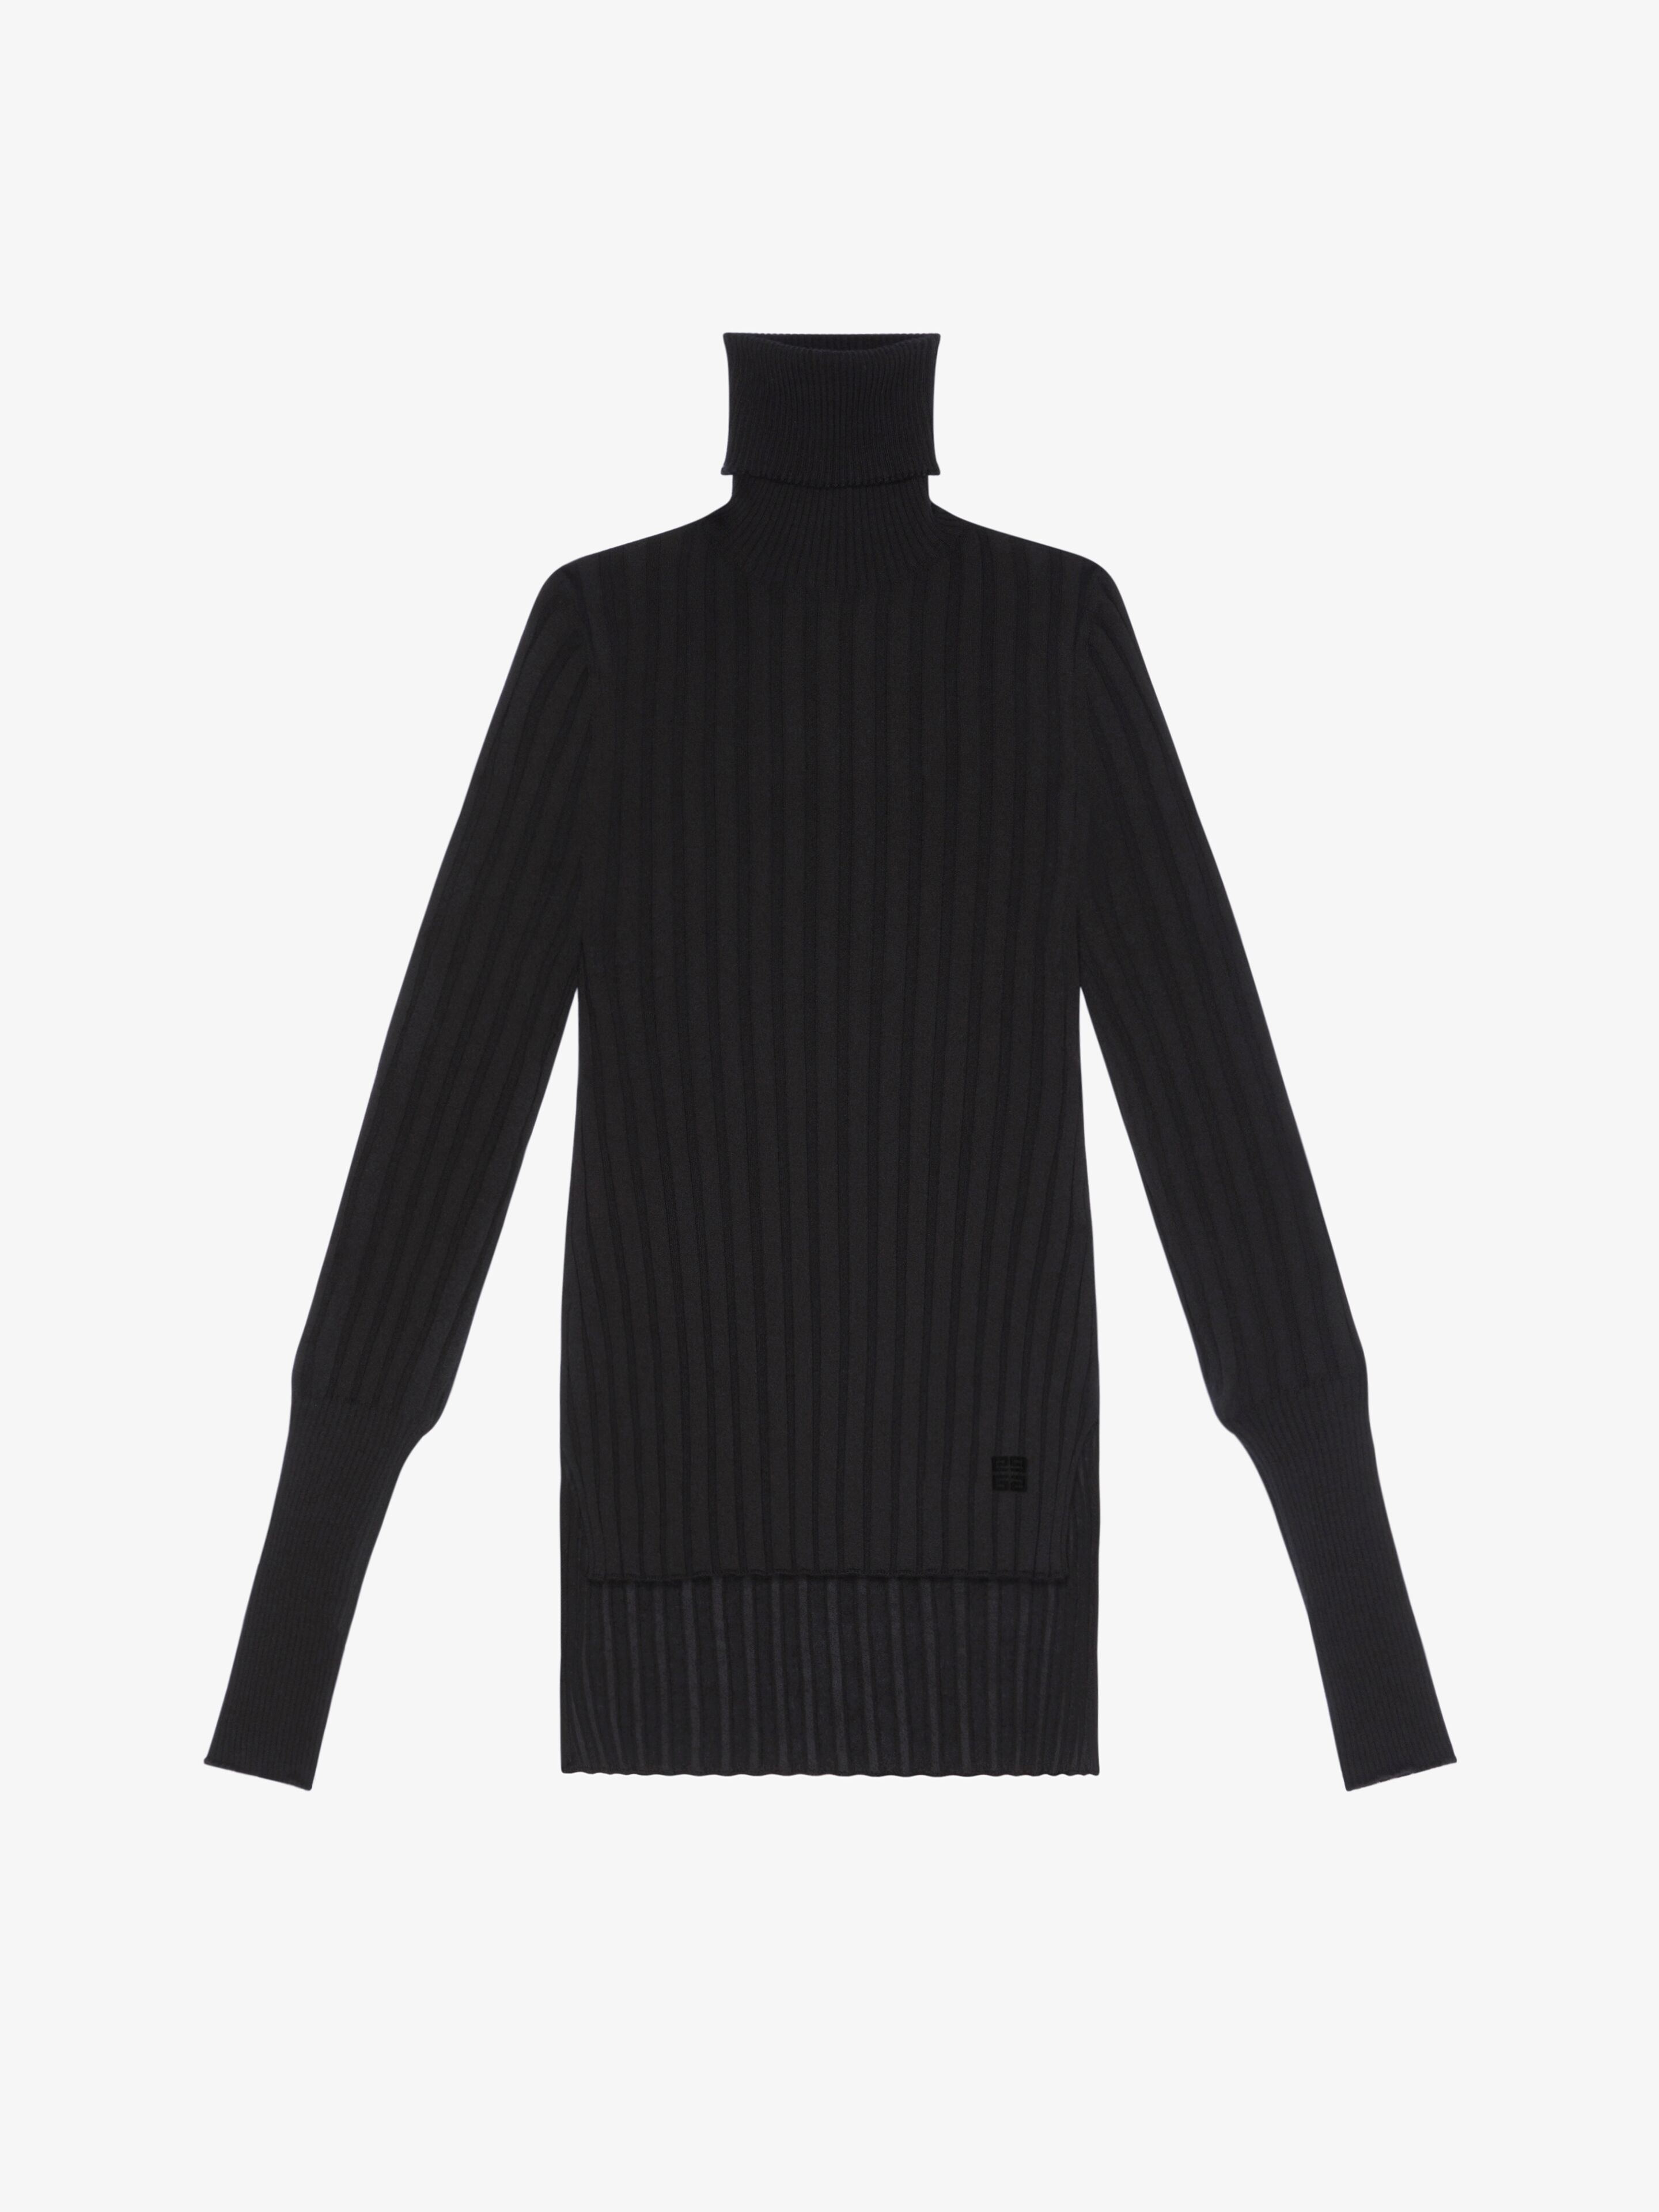 GIVENCHY ASYMMETRICAL TURTLENECK SWEATER IN CASHMERE